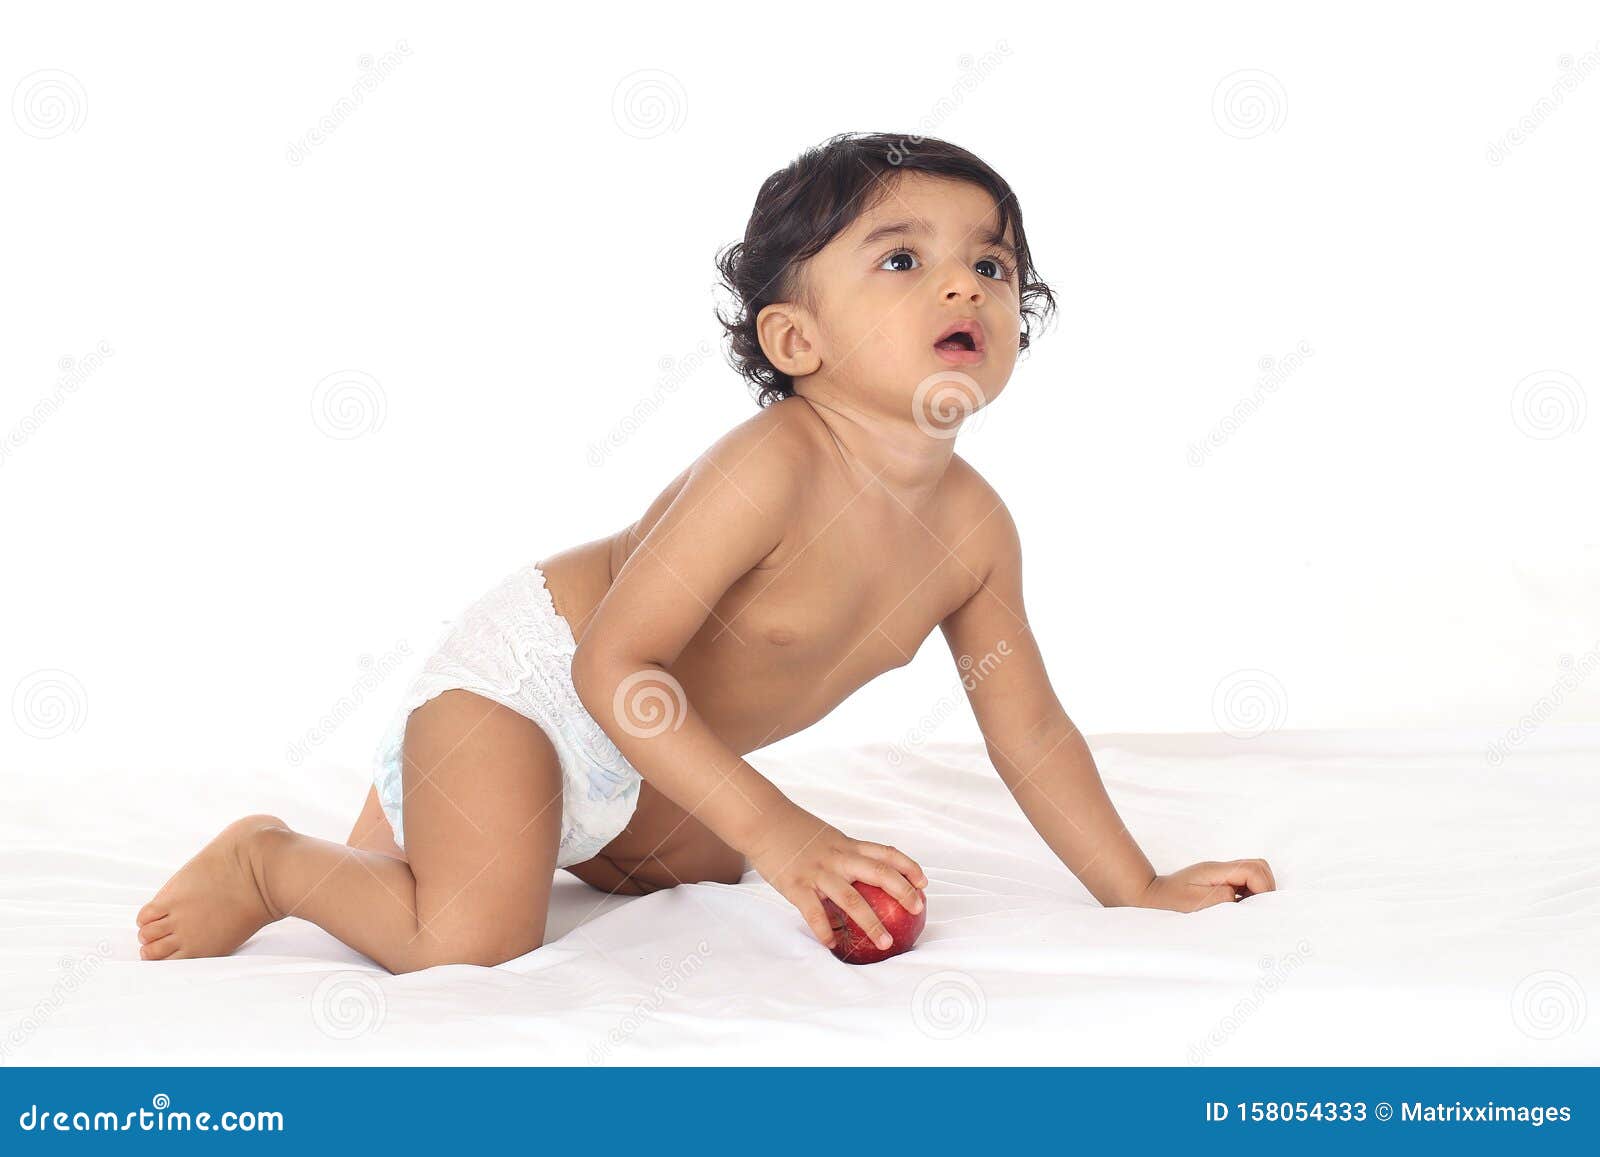 Adorable baby boy crawling stock image. Image of diaper ...